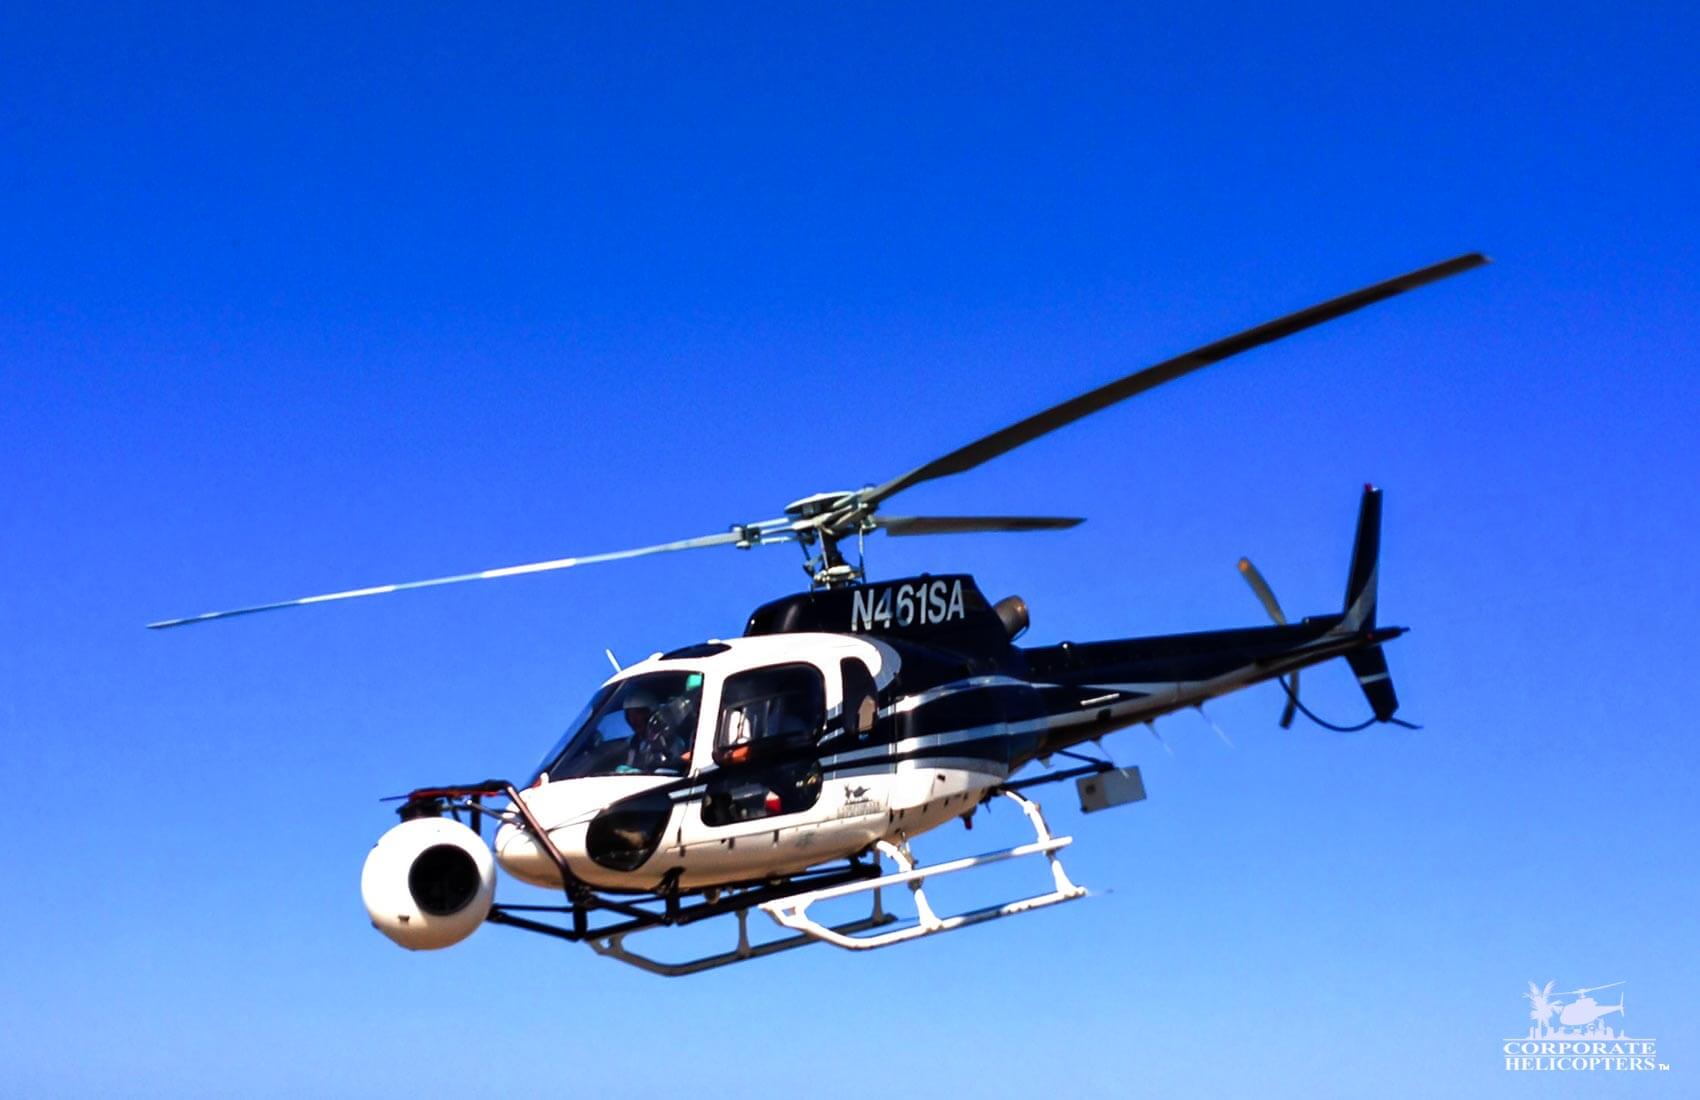 Corporate Helicopters: Tours, Charters, Filming, Sales - San Diego, CA1700 x 1100